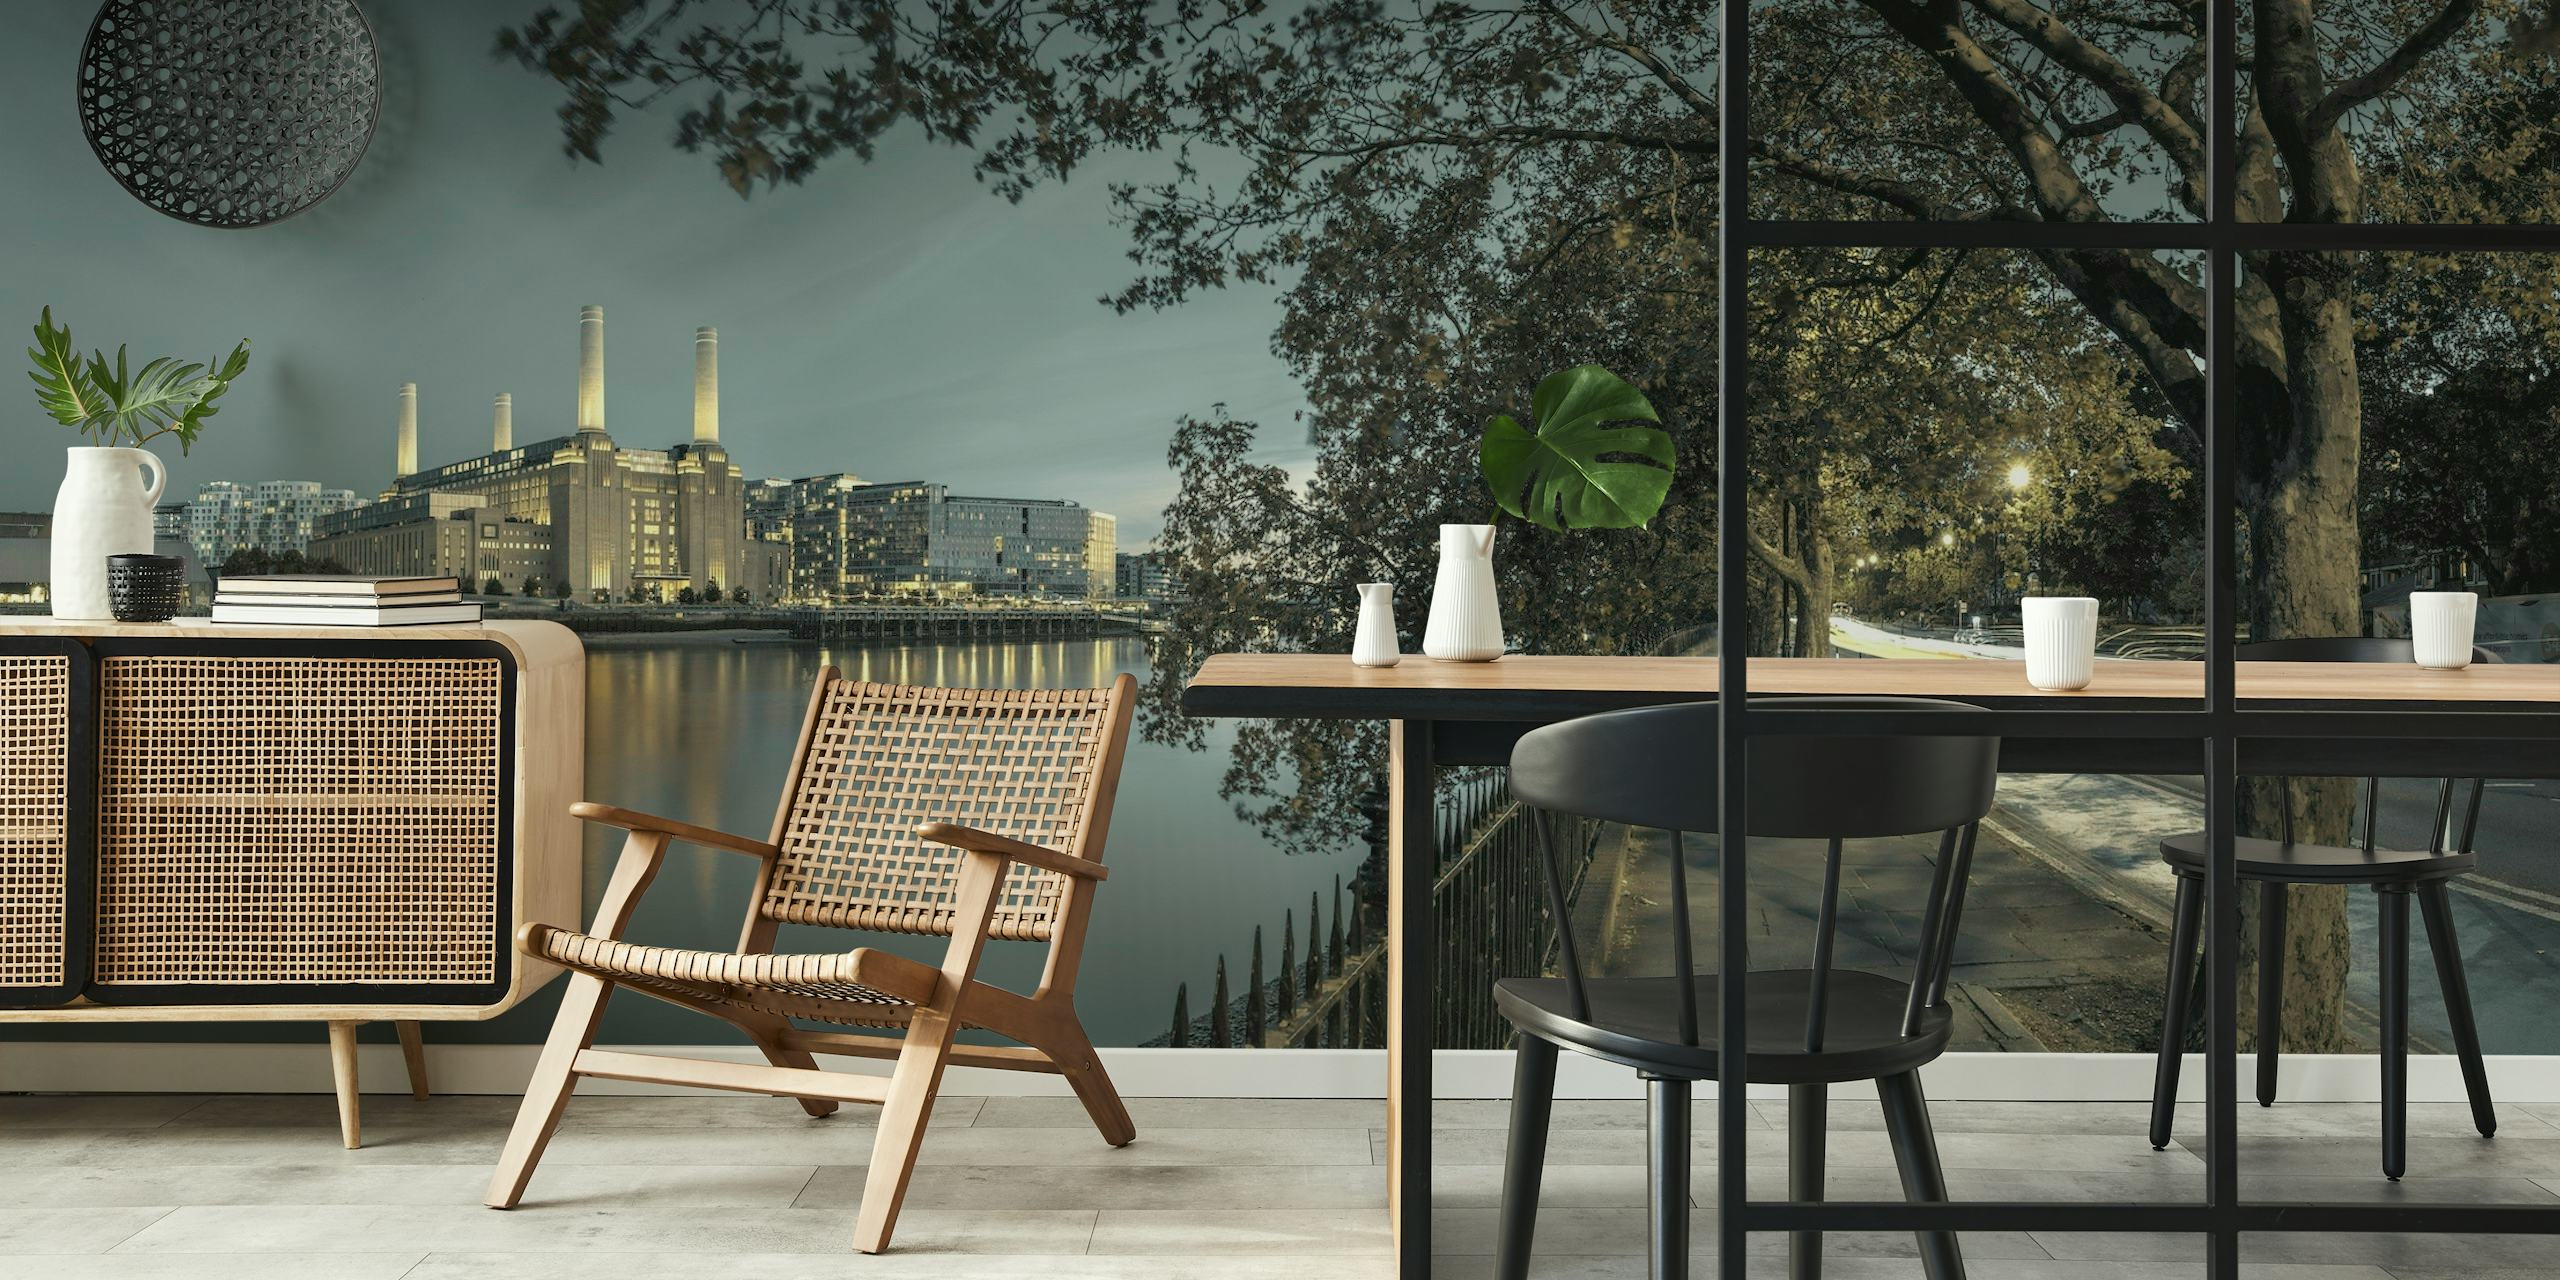 The Magnificence of Battersea wallpaper